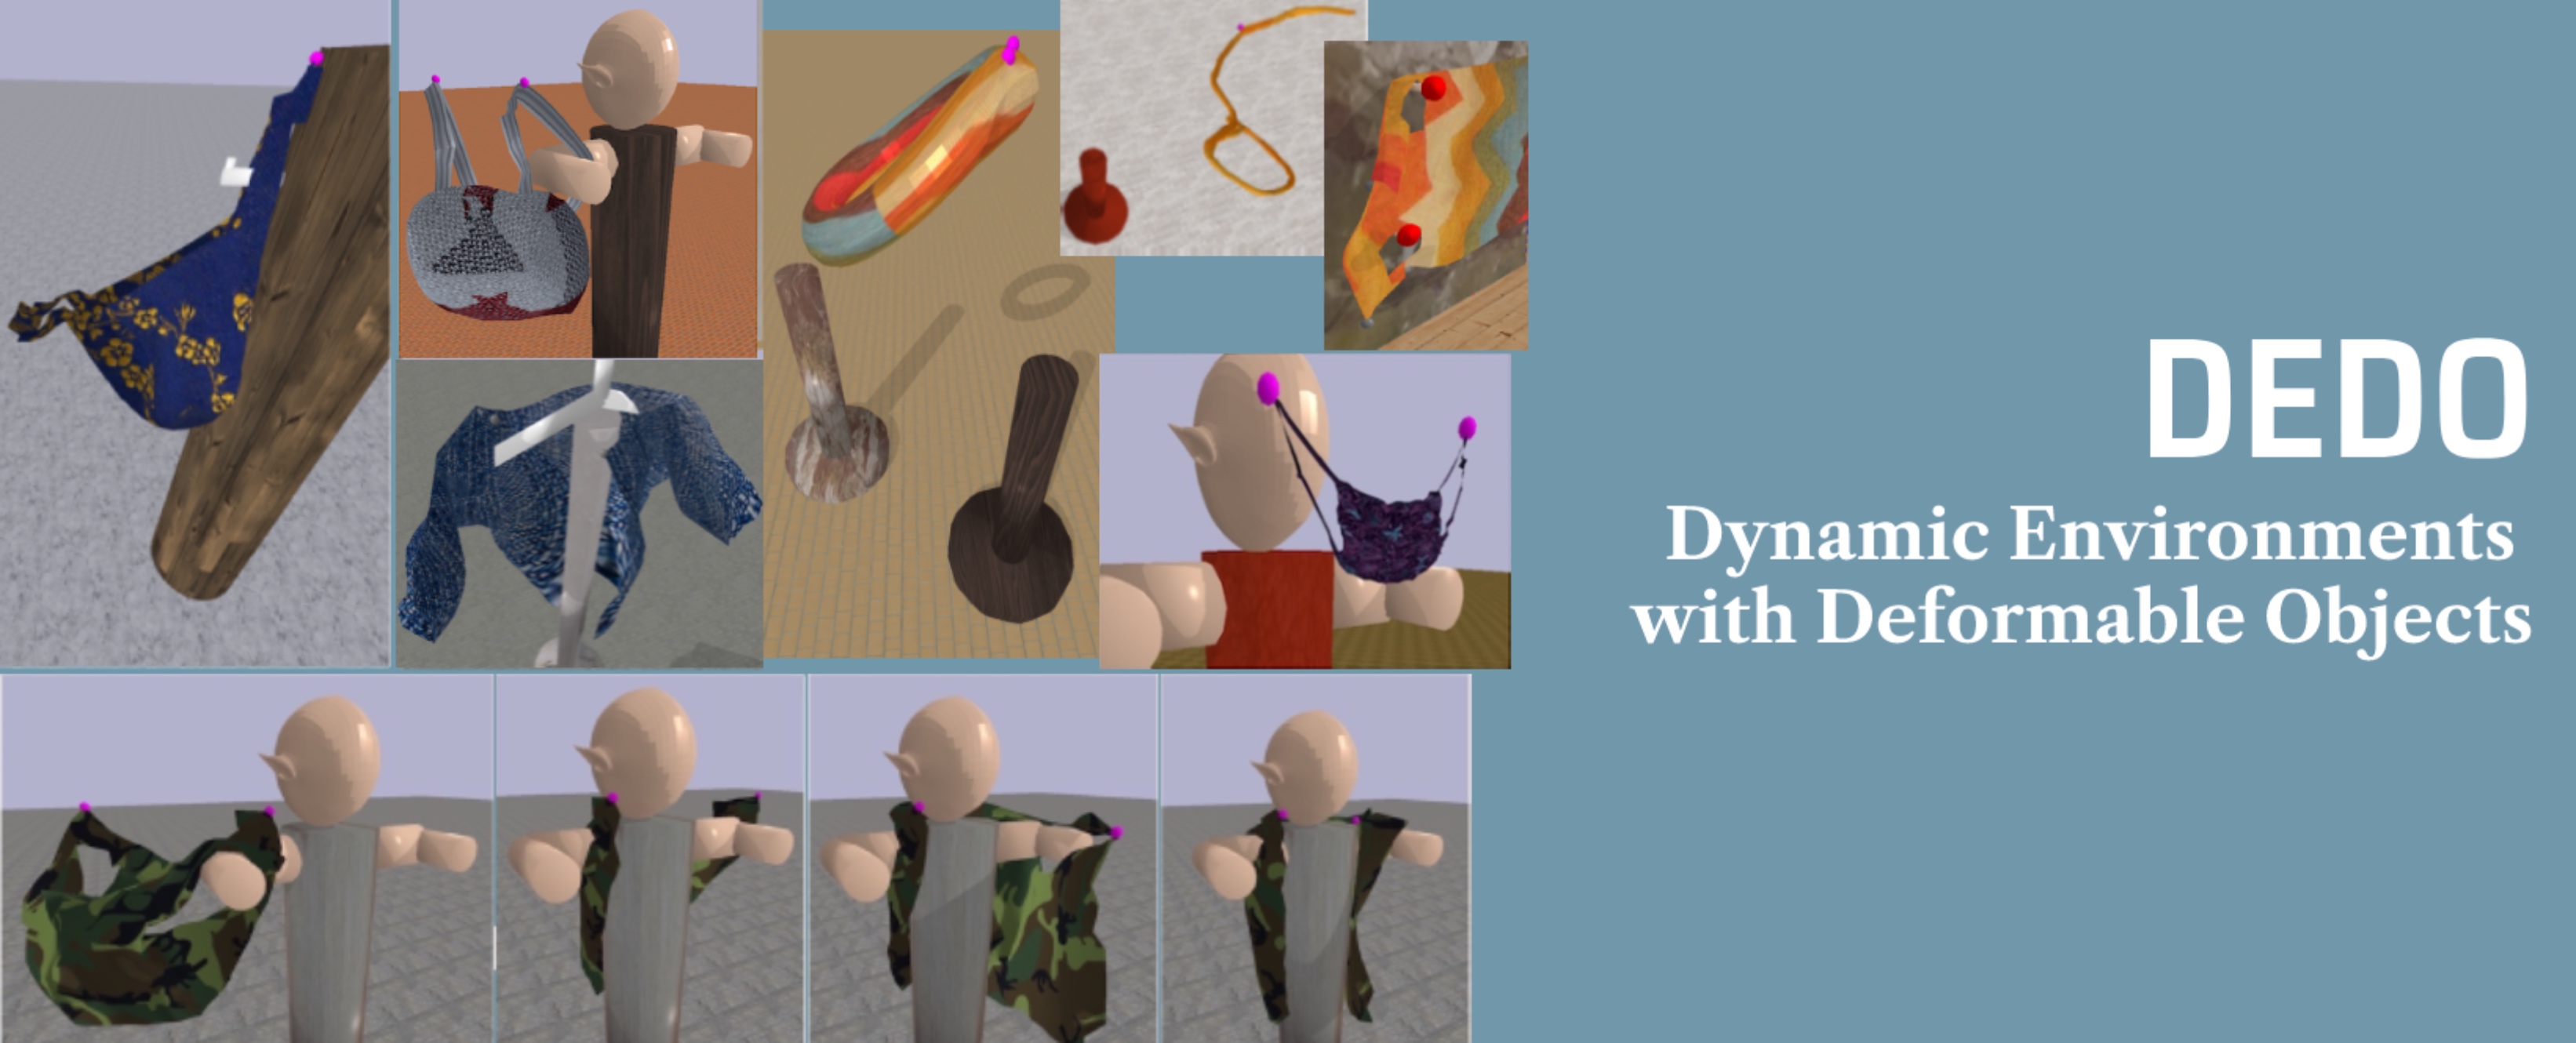 DEDO  - Dynamic Environments with Deformable Objects